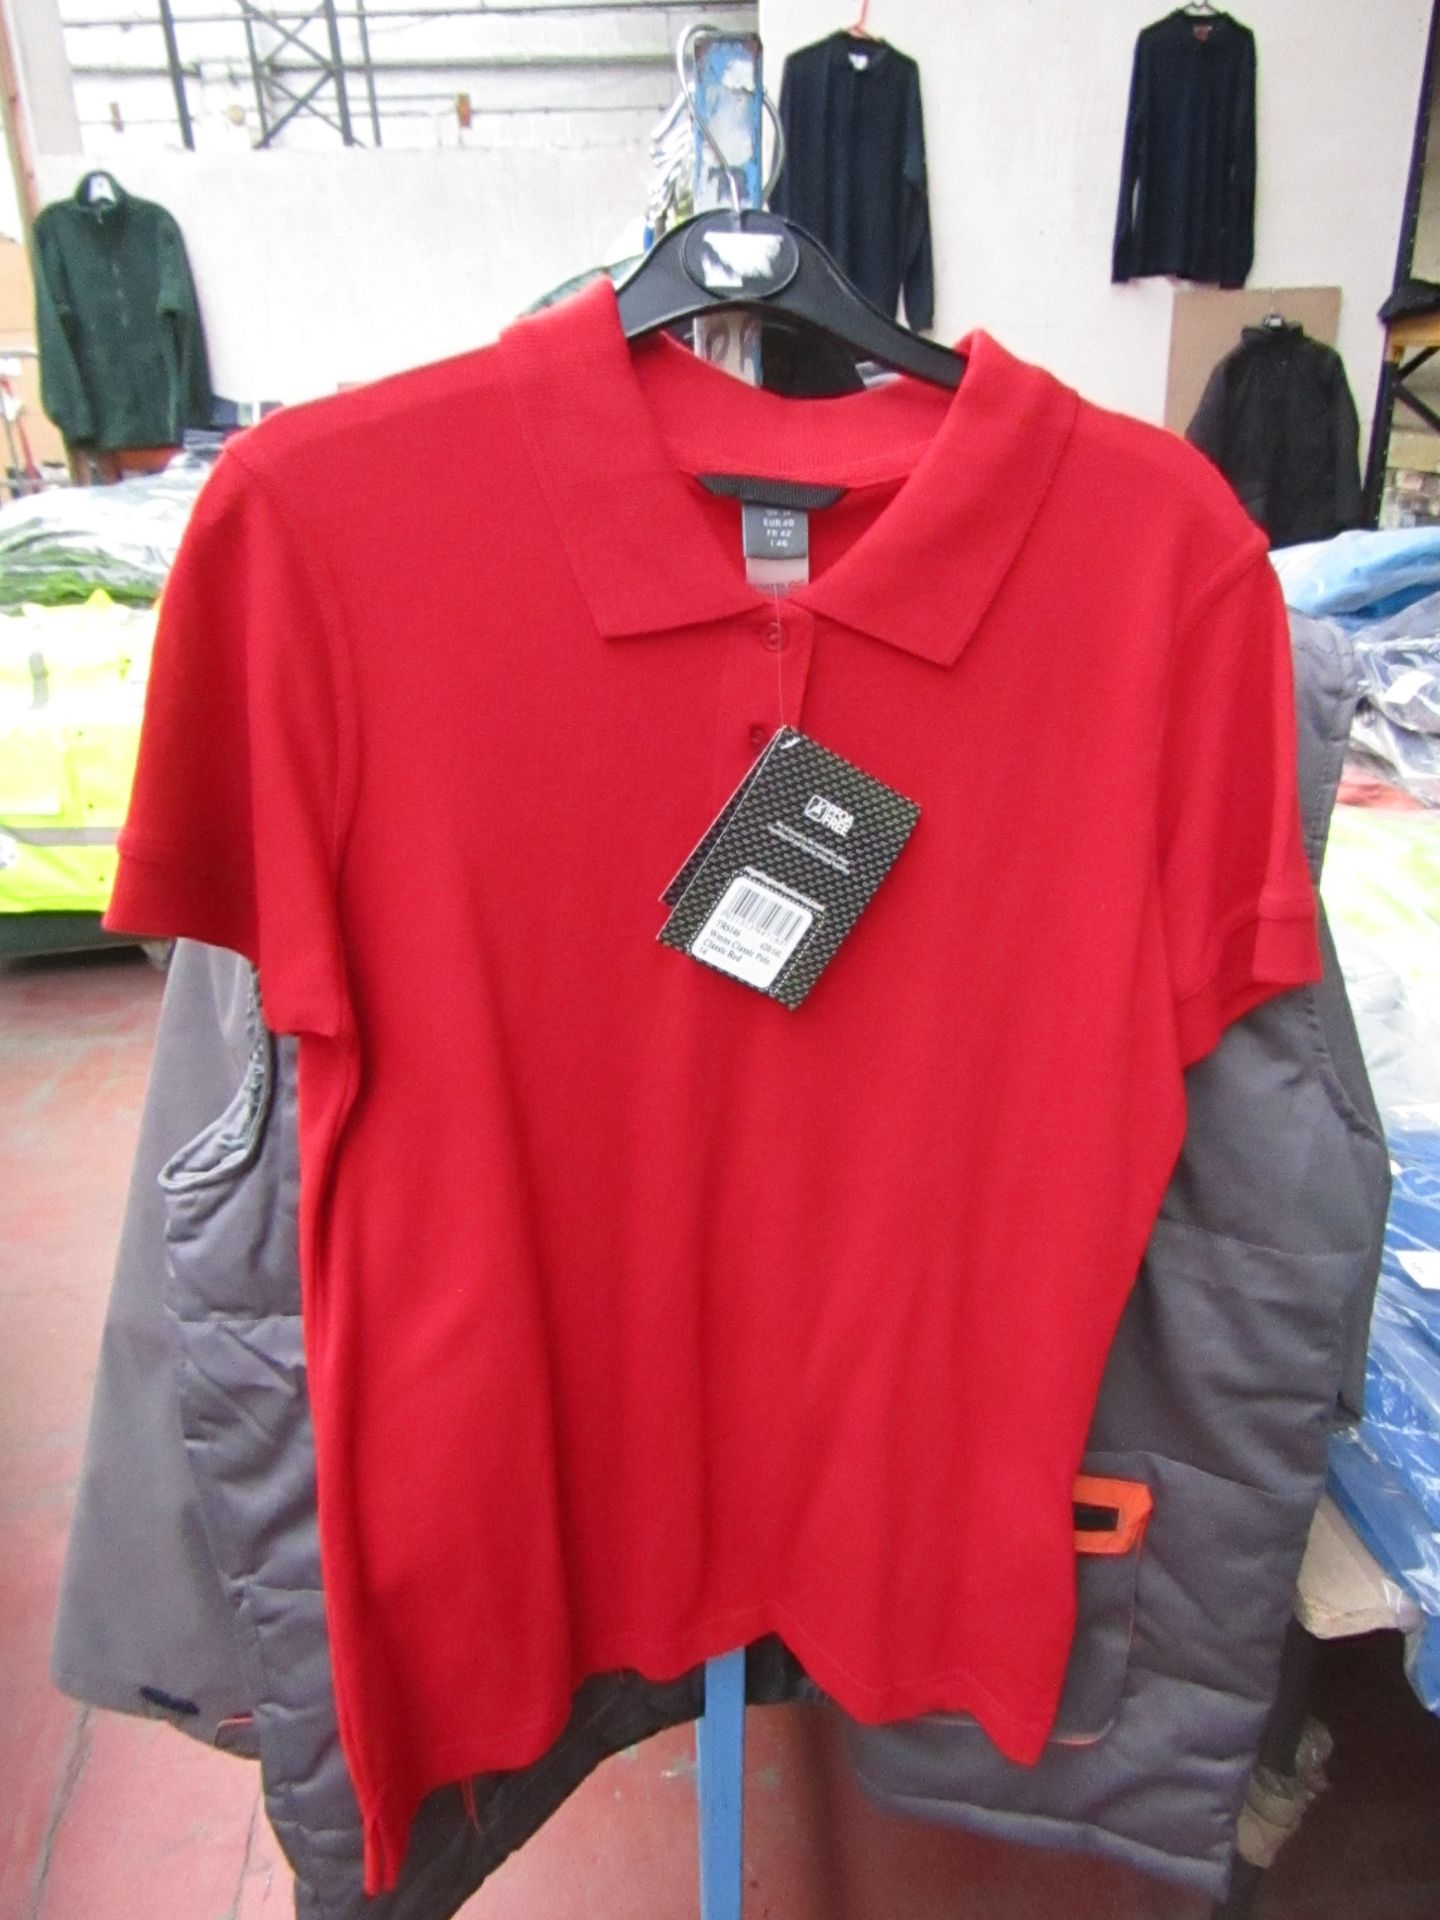 2x Ladies Regatta Red Polo Shirt, Size 20. New in Packaging